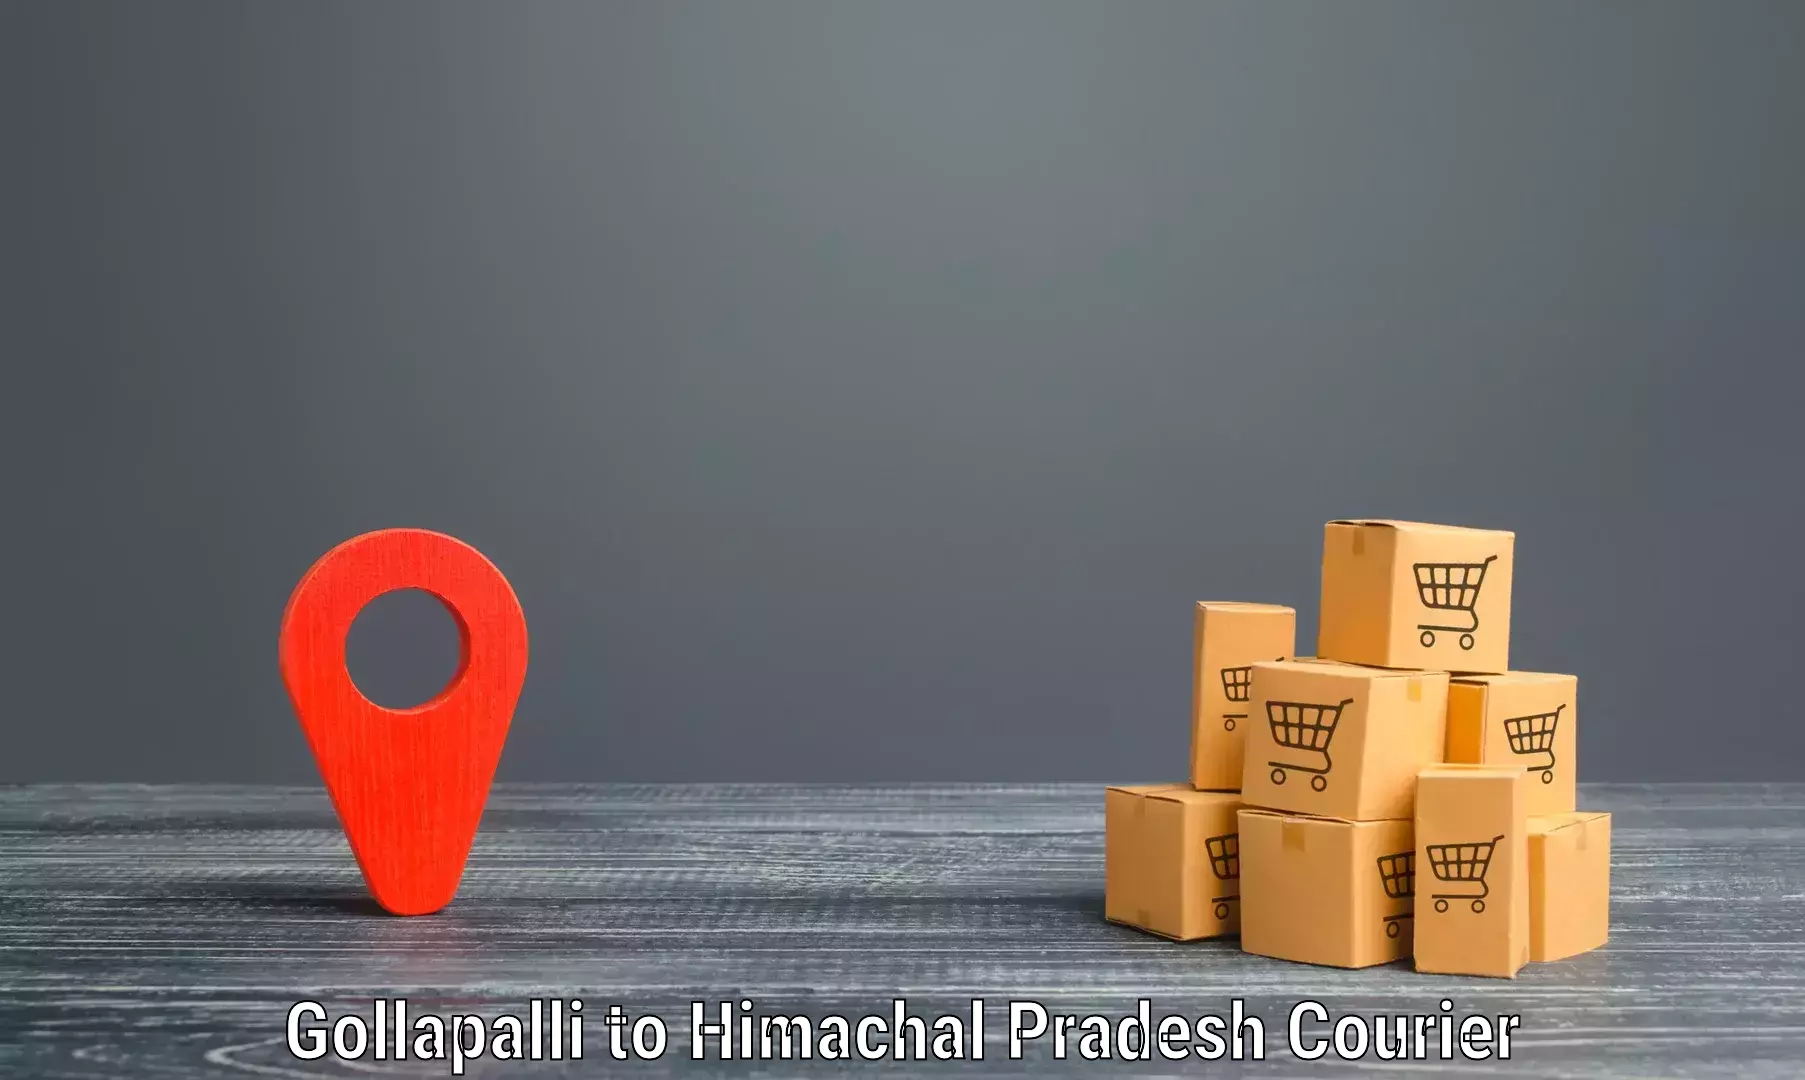 Reliable delivery network Gollapalli to Kandaghat